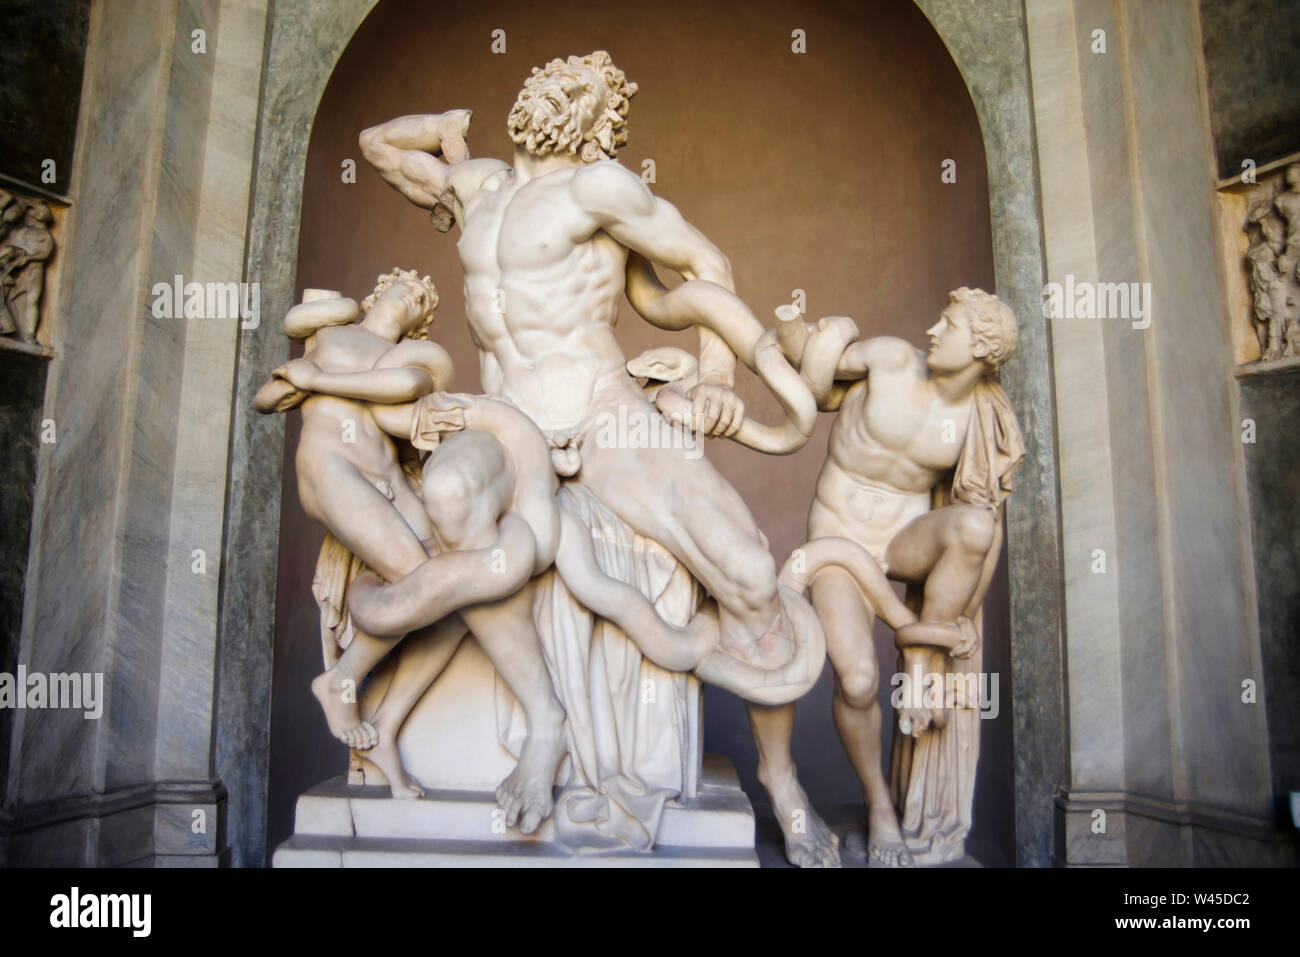 Statue depicting struggle, the coils of the python are being uncoiled, Sistine Chapel, Vatican Museum, Rome, Italy. Stock Photo